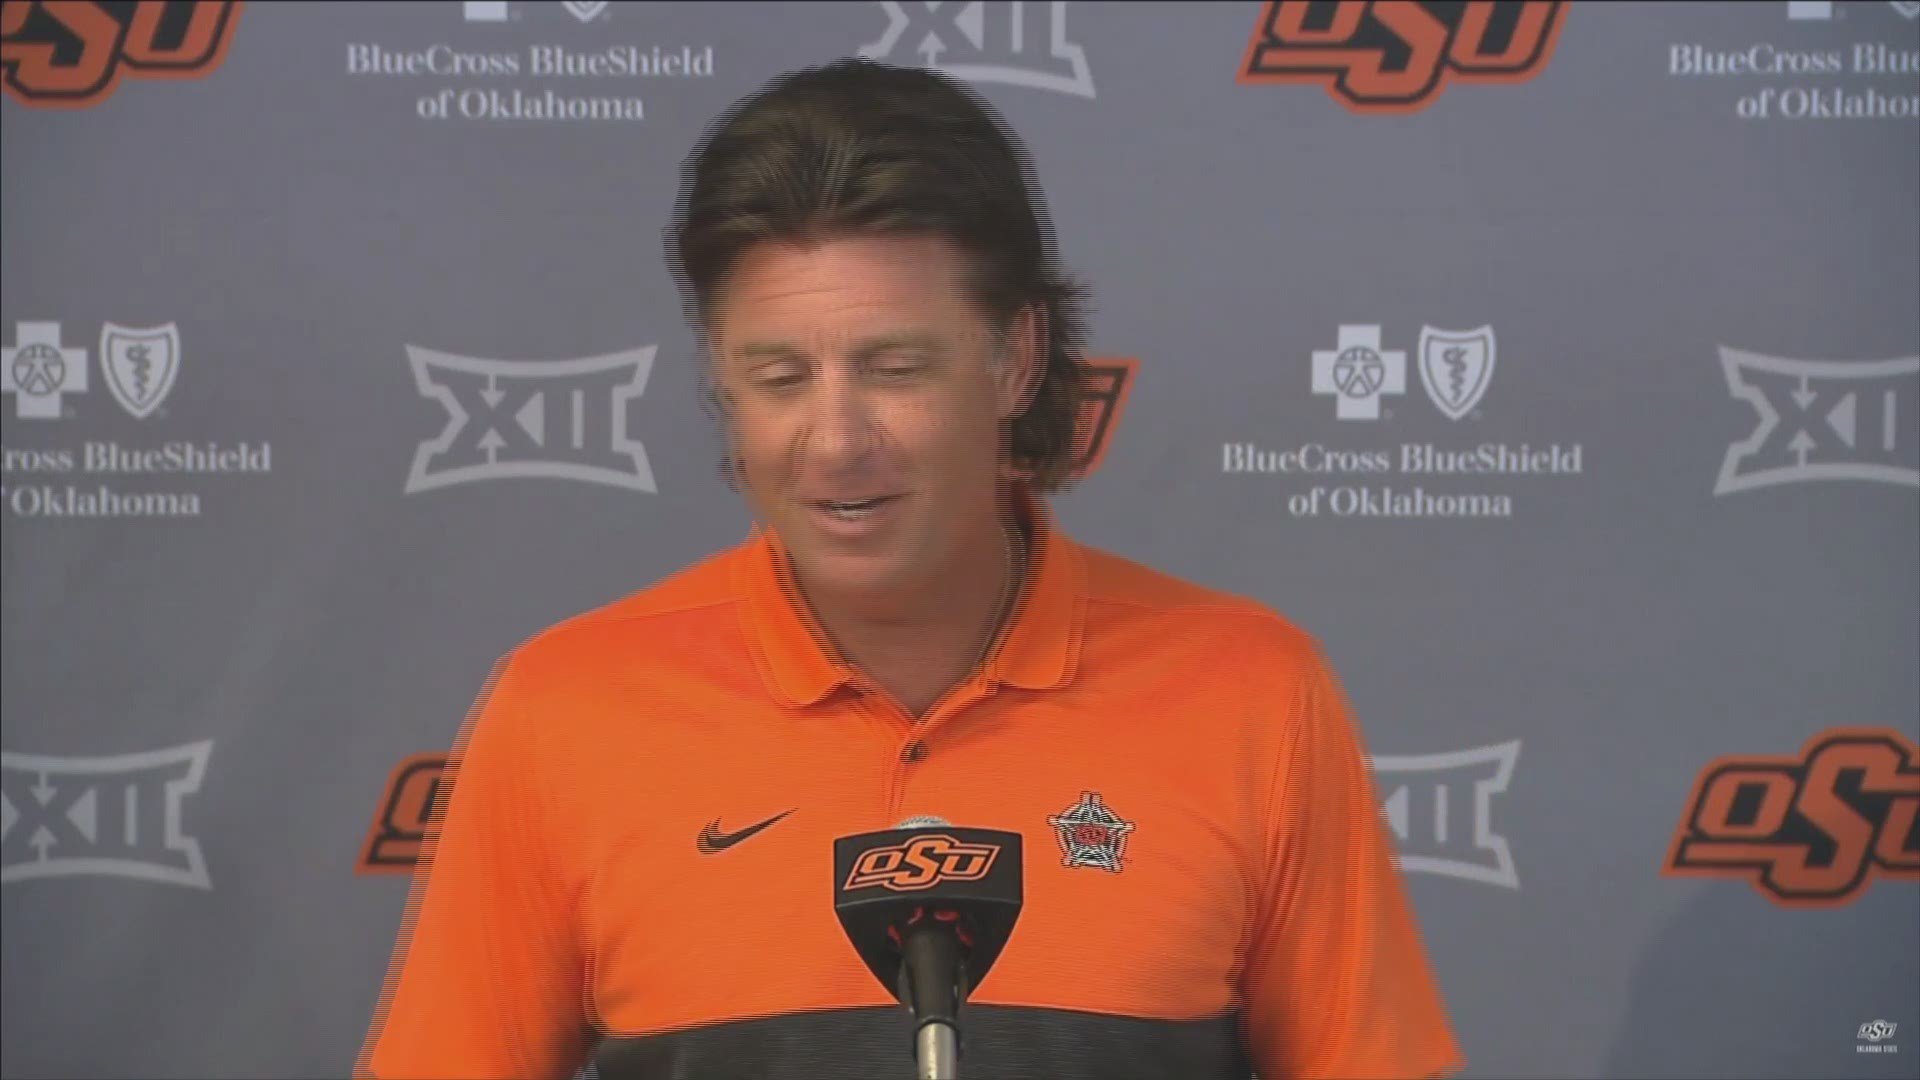 Oklahoma State head coach Mike Gundy fielded questions about the Longhorns, which included being asked about the 'A/C' situation.